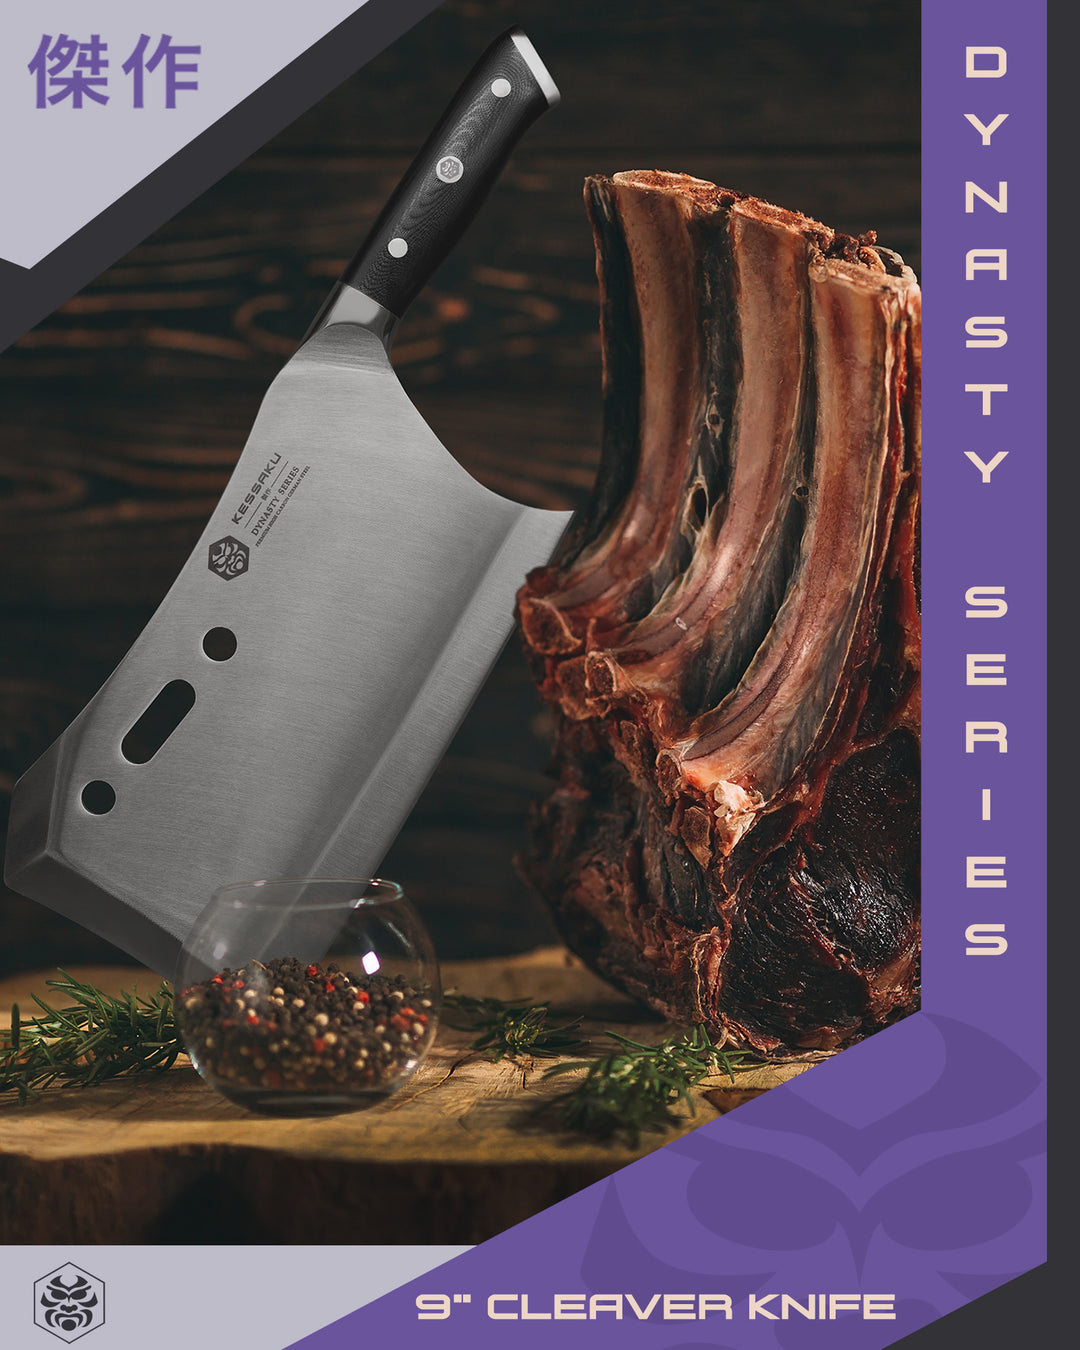 The Dynasty Annihilator Knife impaling a cutting board with beef ribs beside it